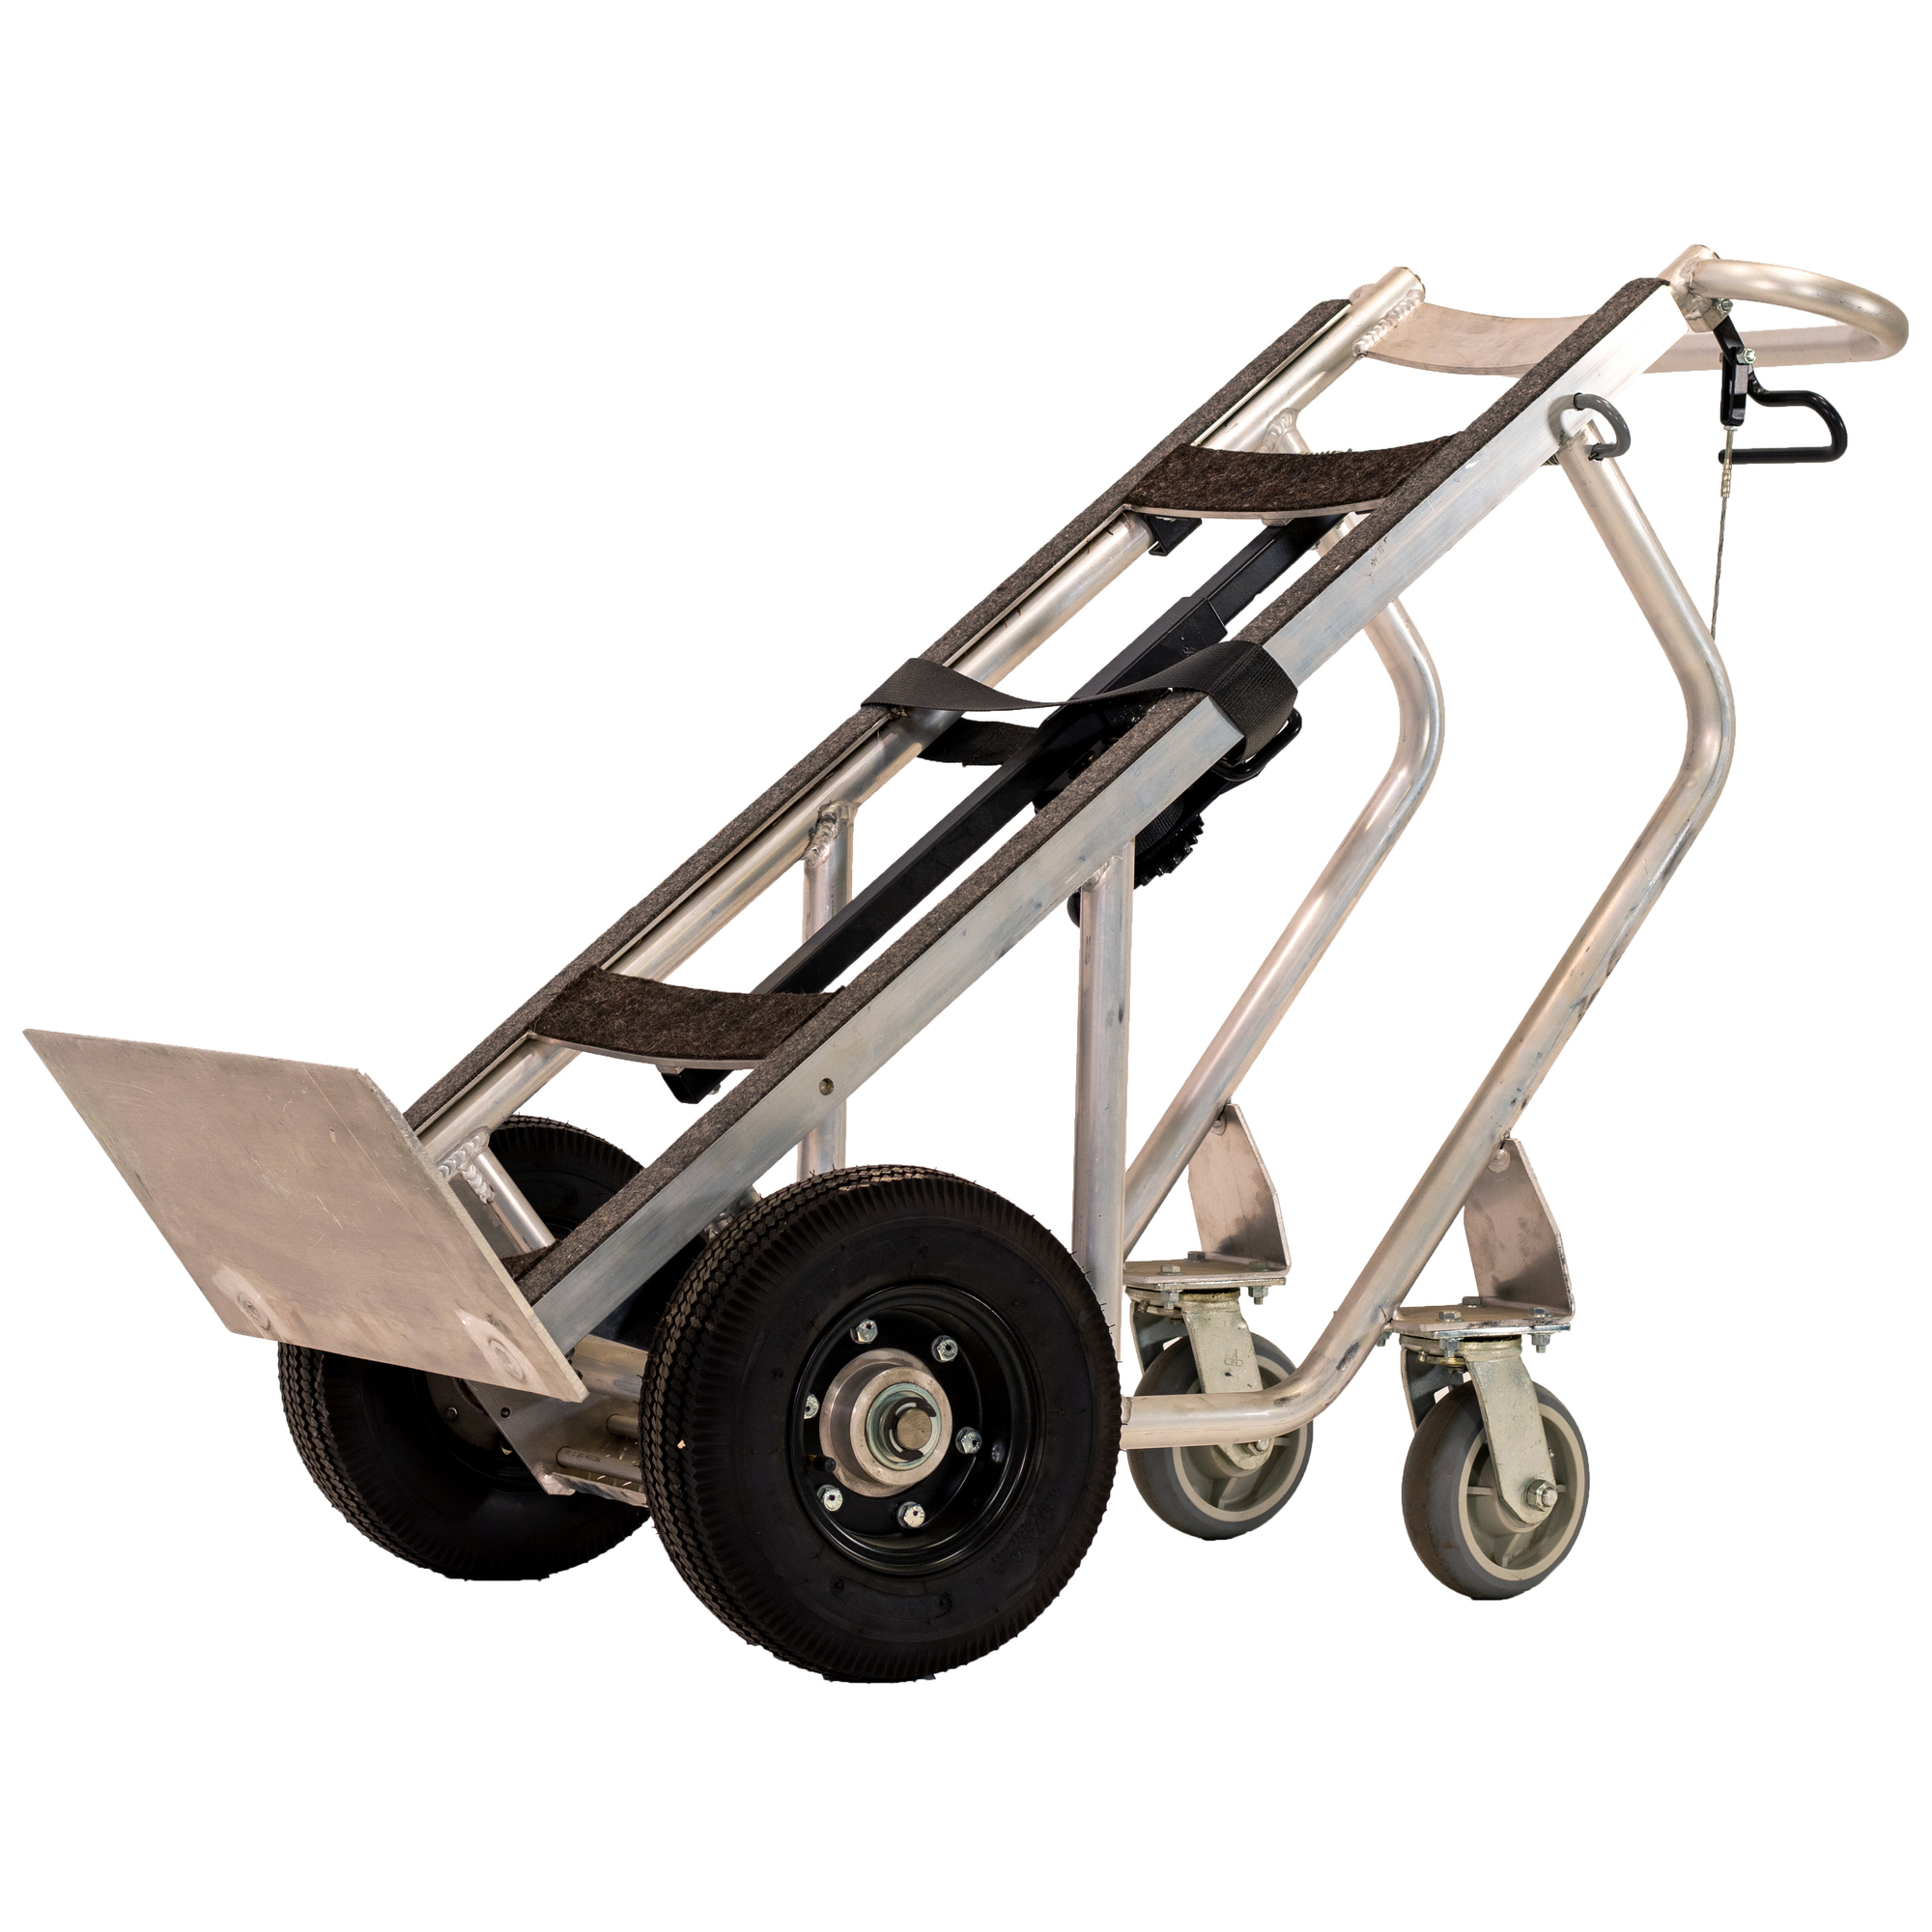 Valley Craft, Deluxe Commercial Hand Truck, Spring Loaded Frame, Load Capacity 1000 lb, Height 50 in, Material Aluminum, Model F89699